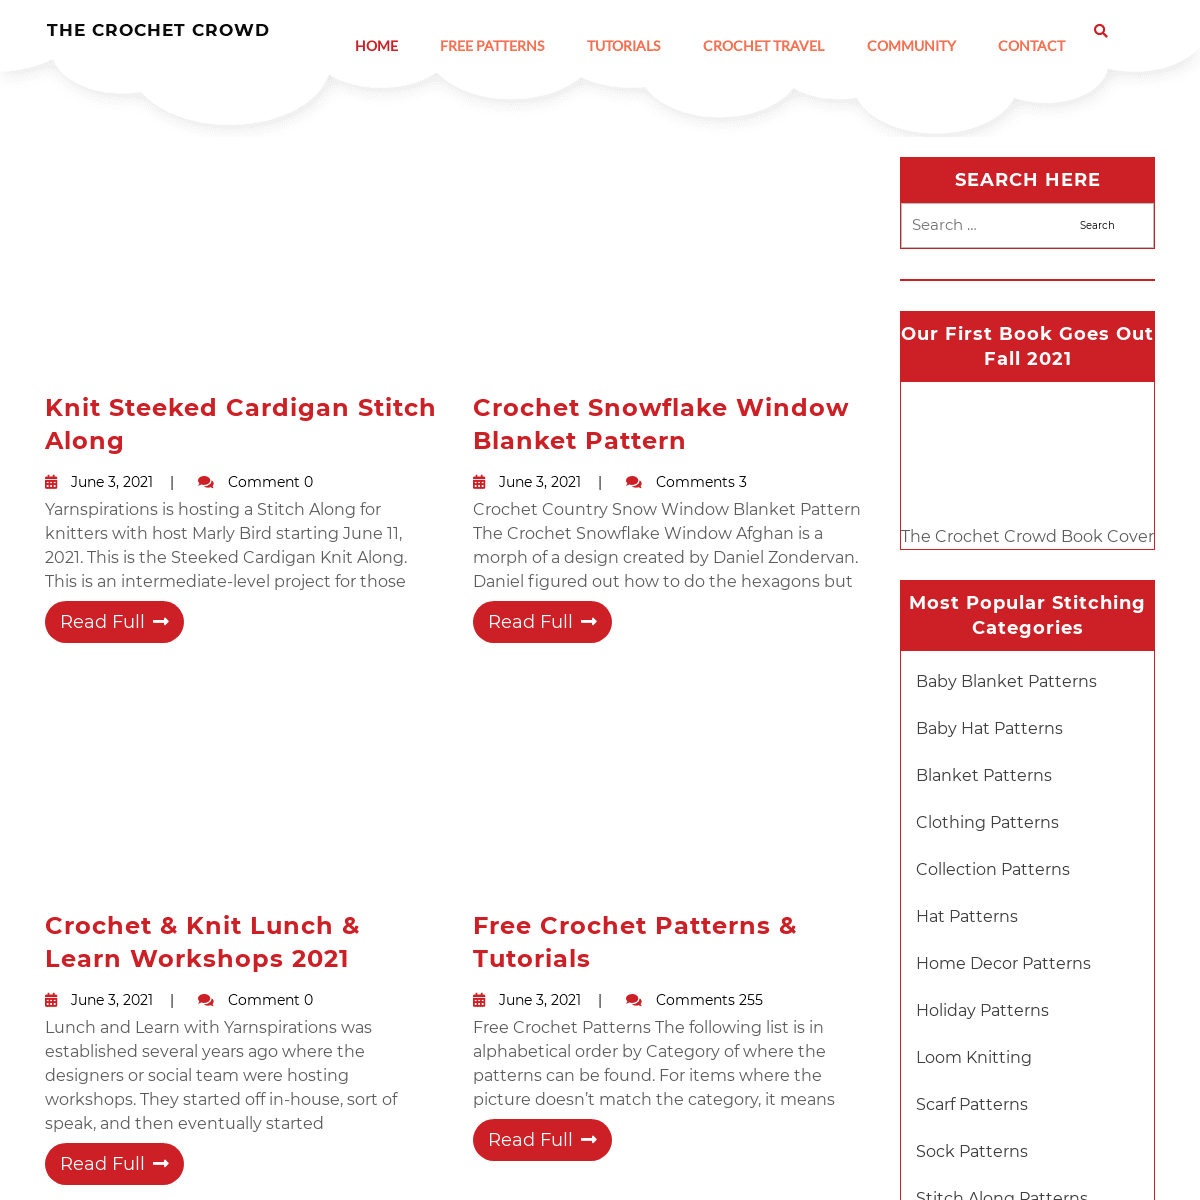 A complete backup of https://thecrochetcrowd.com